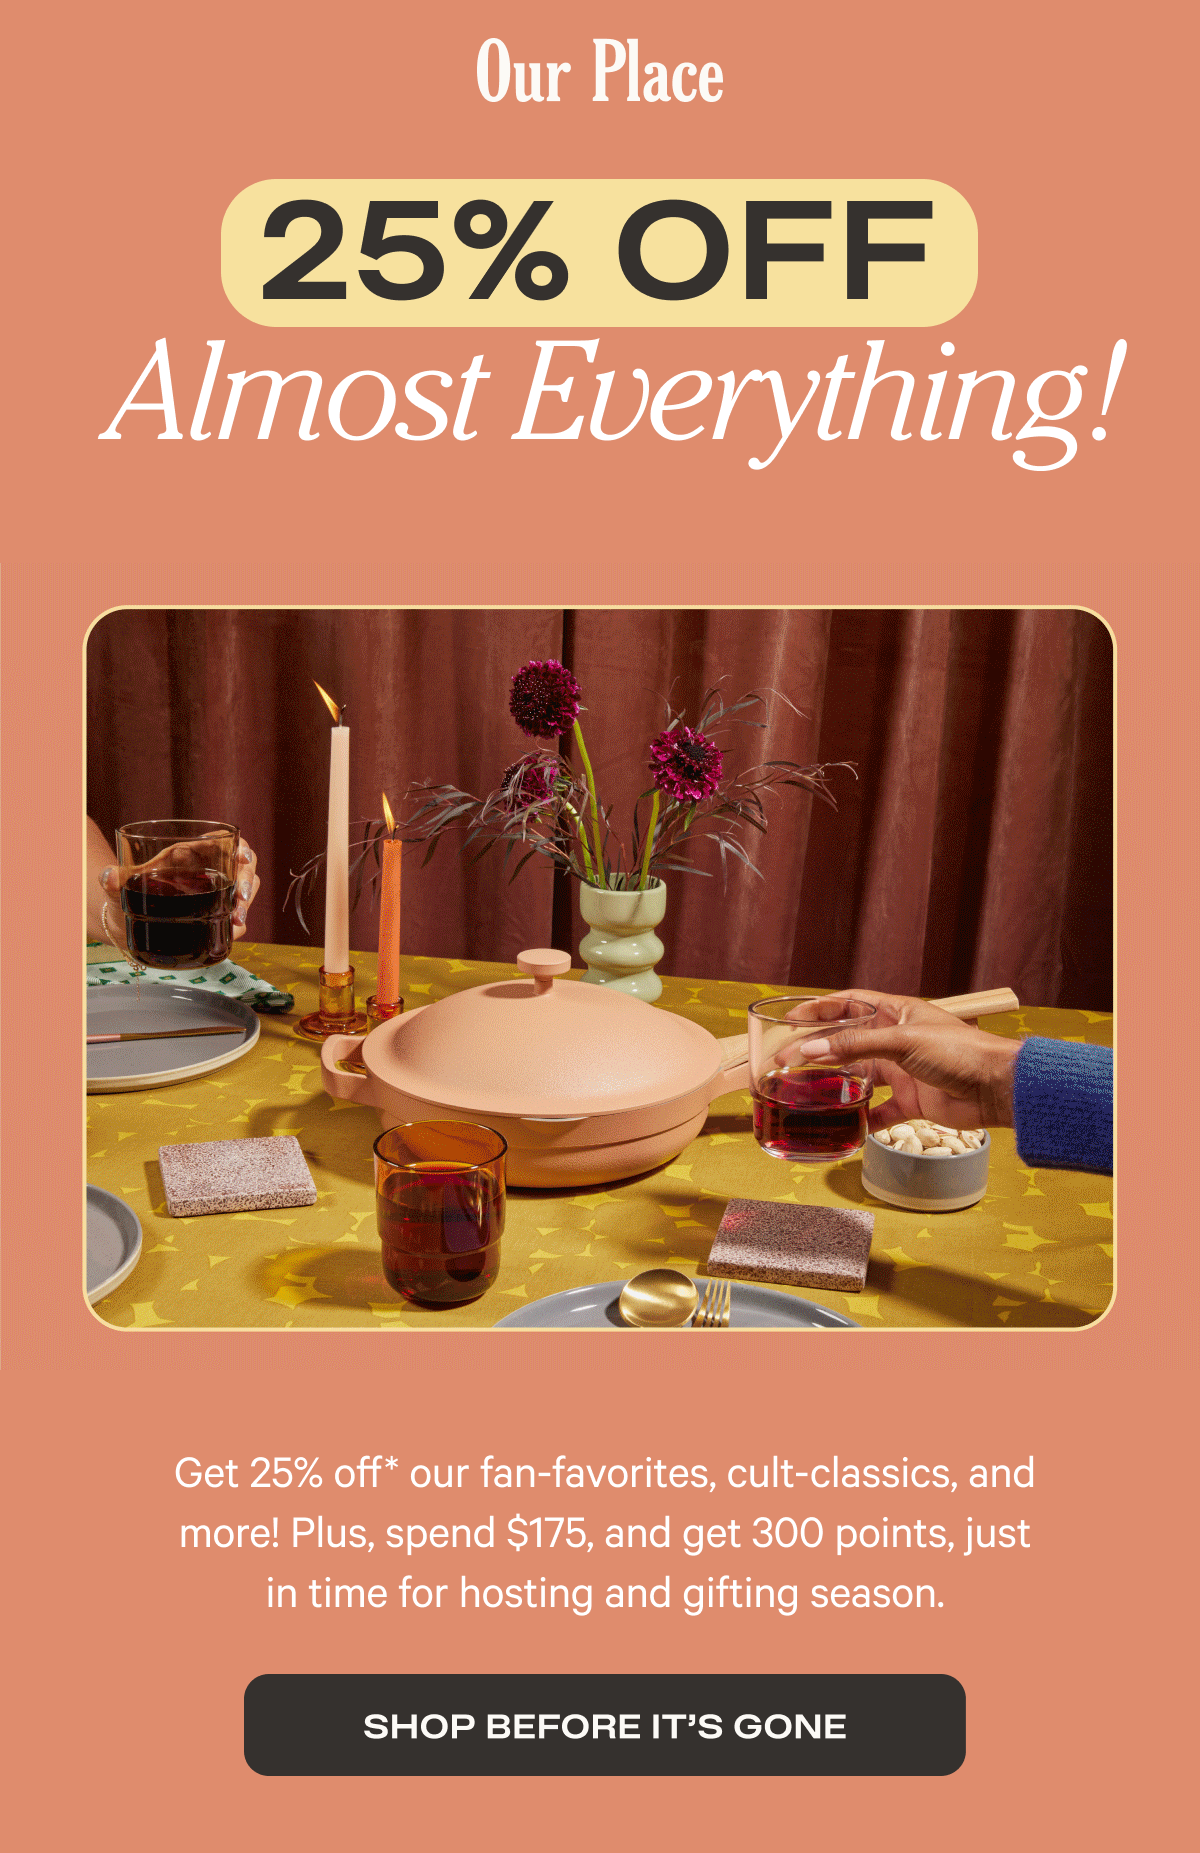 Our Place | 25% OFF Almost Everything! | Shop Before It's Gone